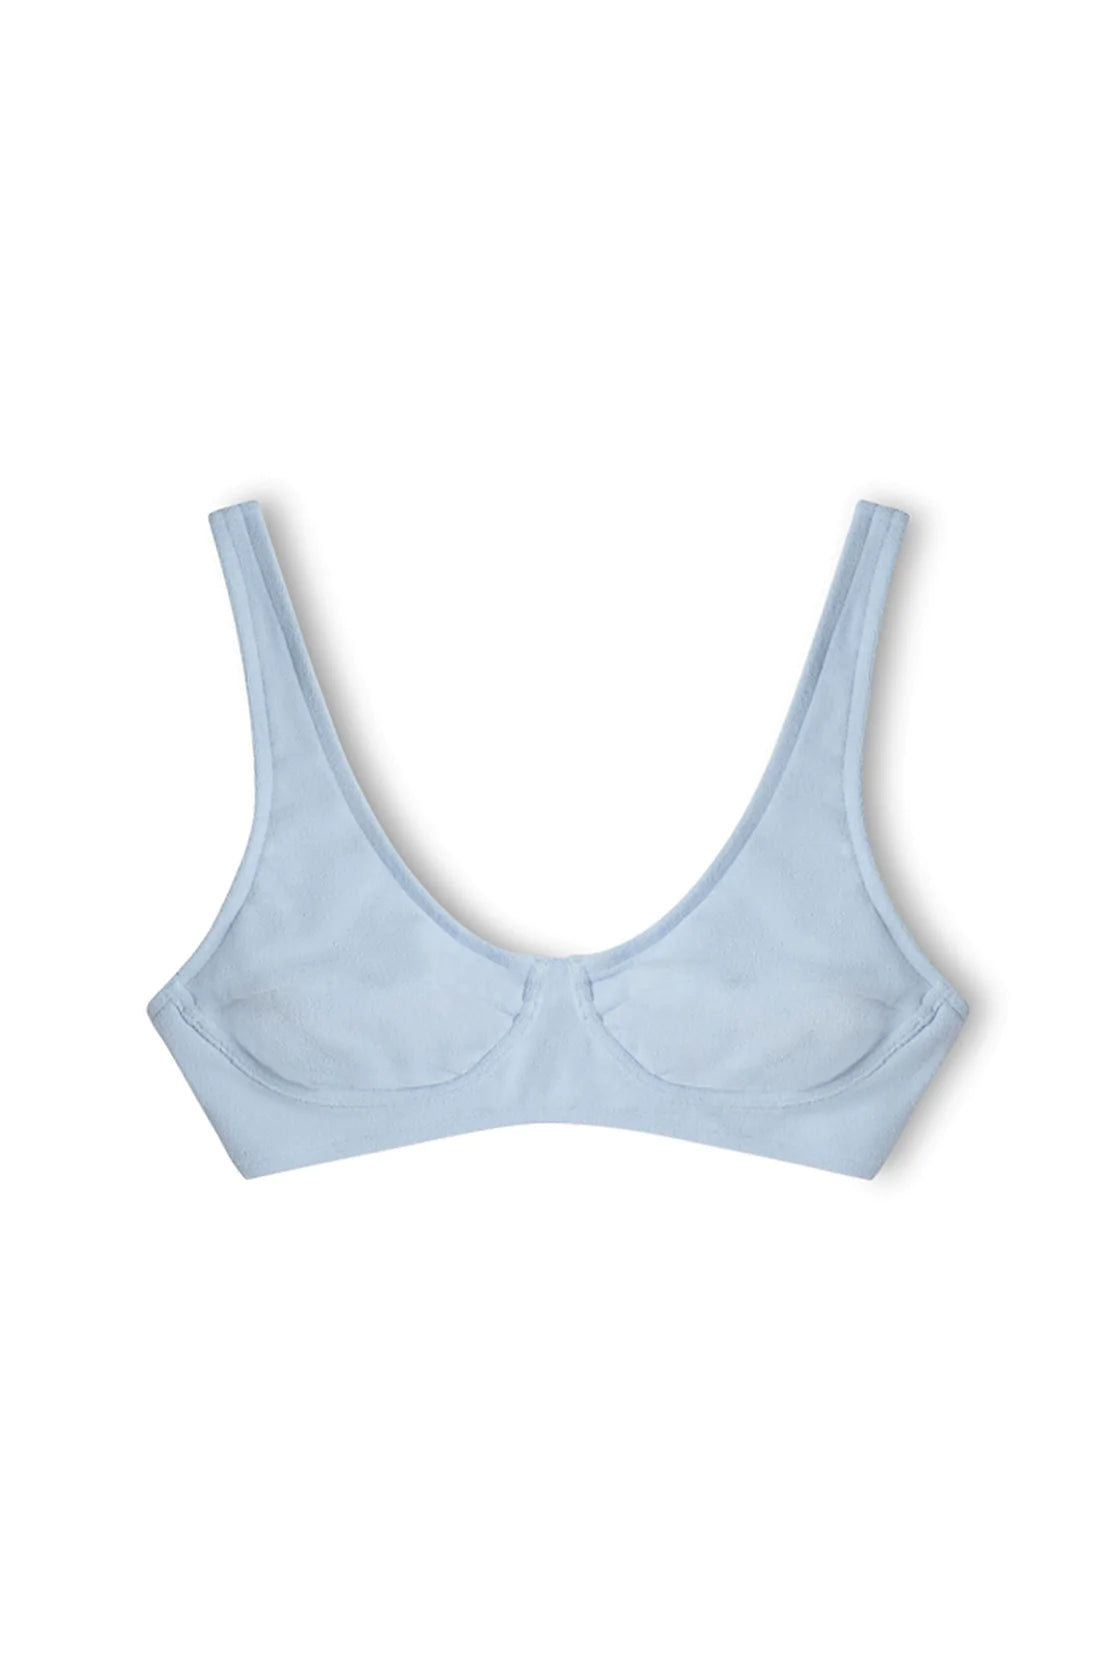 Cool Blue Towelling Waisted Bra Cup